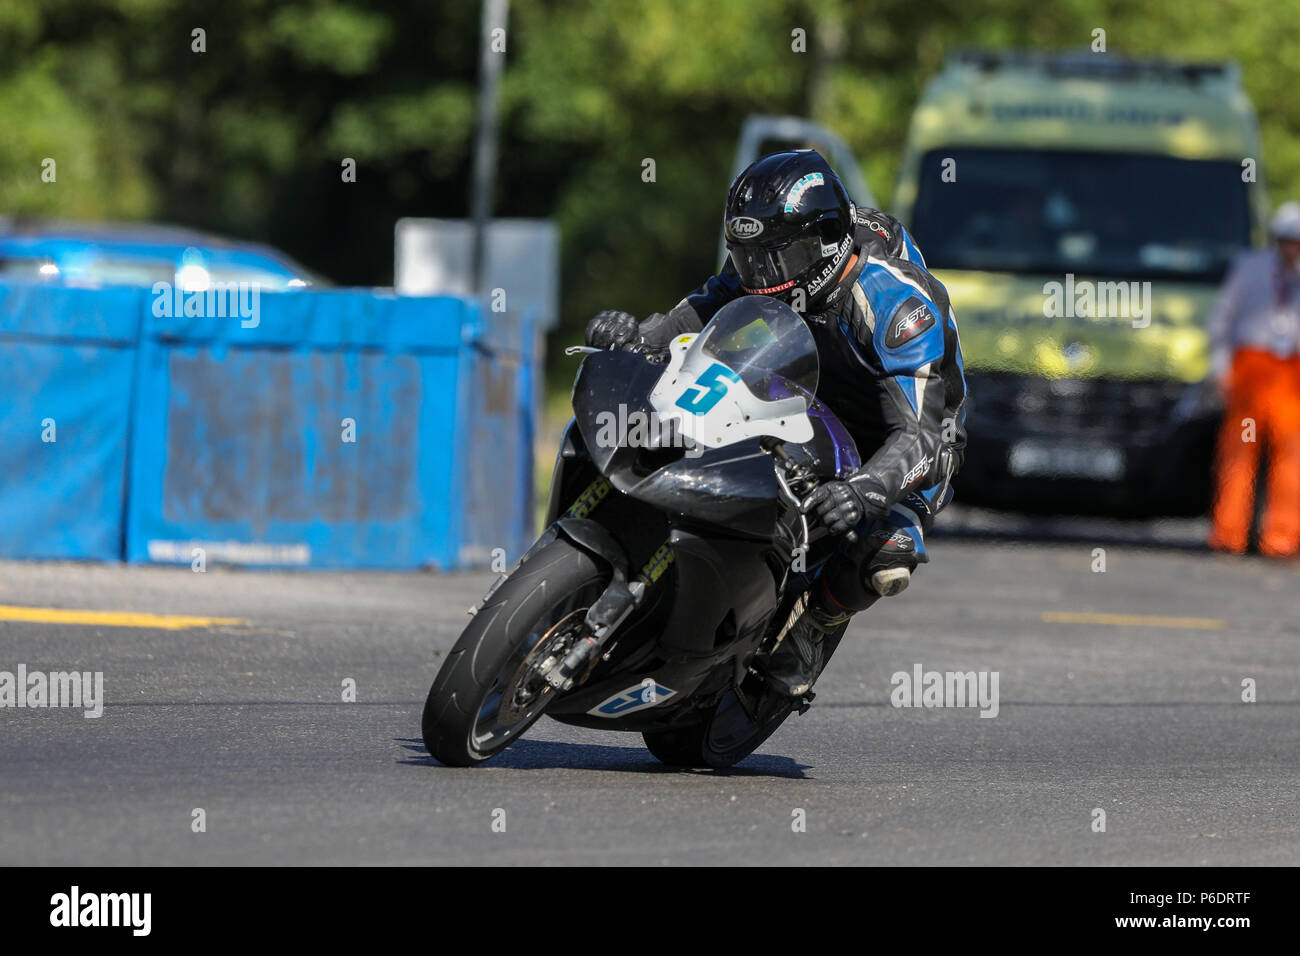 Enniskillen, County Fermanagh, Northern Ireland. 29th June, 2018. Irish Road Race Motorcycle Championships; Thomas Maxwell qualified in 4th place in the SuperSports Credit: Action Plus Sports/Alamy Live News Stock Photo